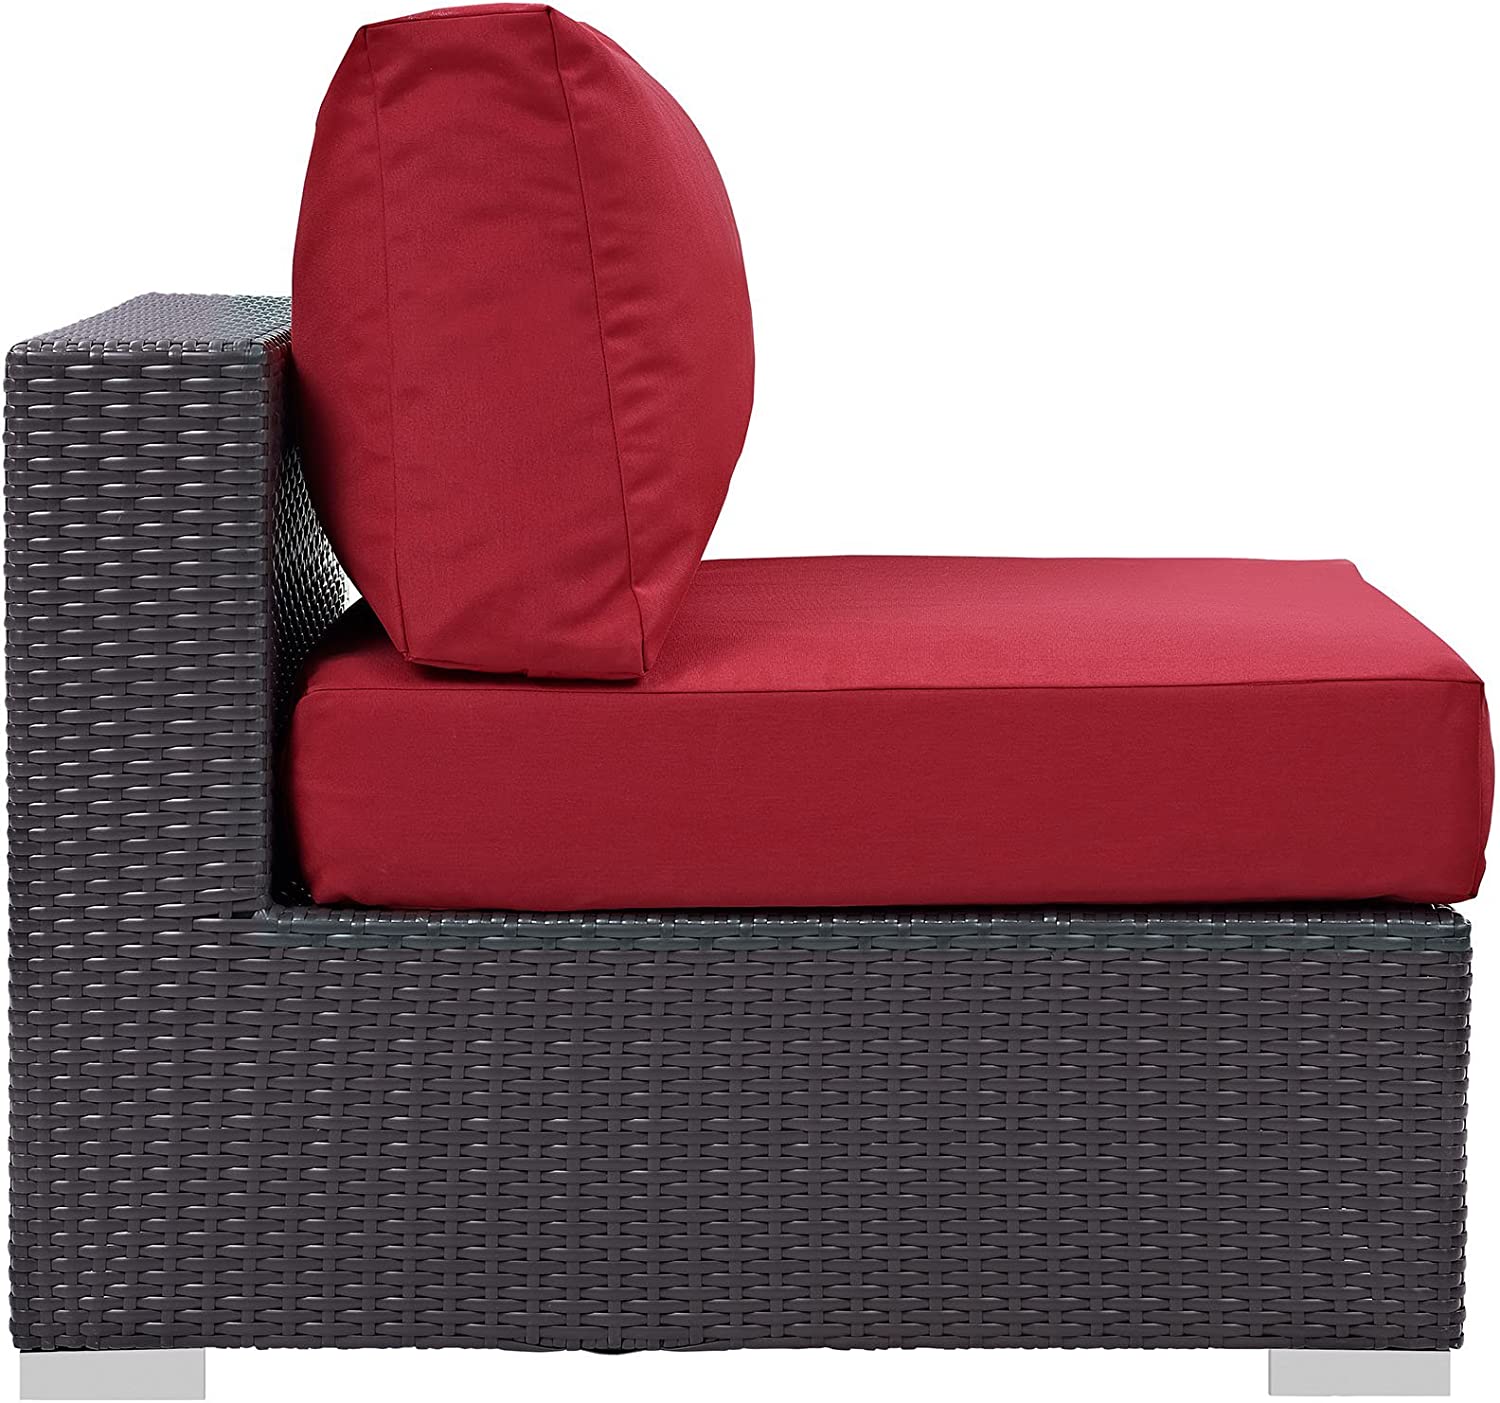 Modway Convene Wicker Rattan Outdoor Patio Sectional Sofa Armless Chair in Espresso Red